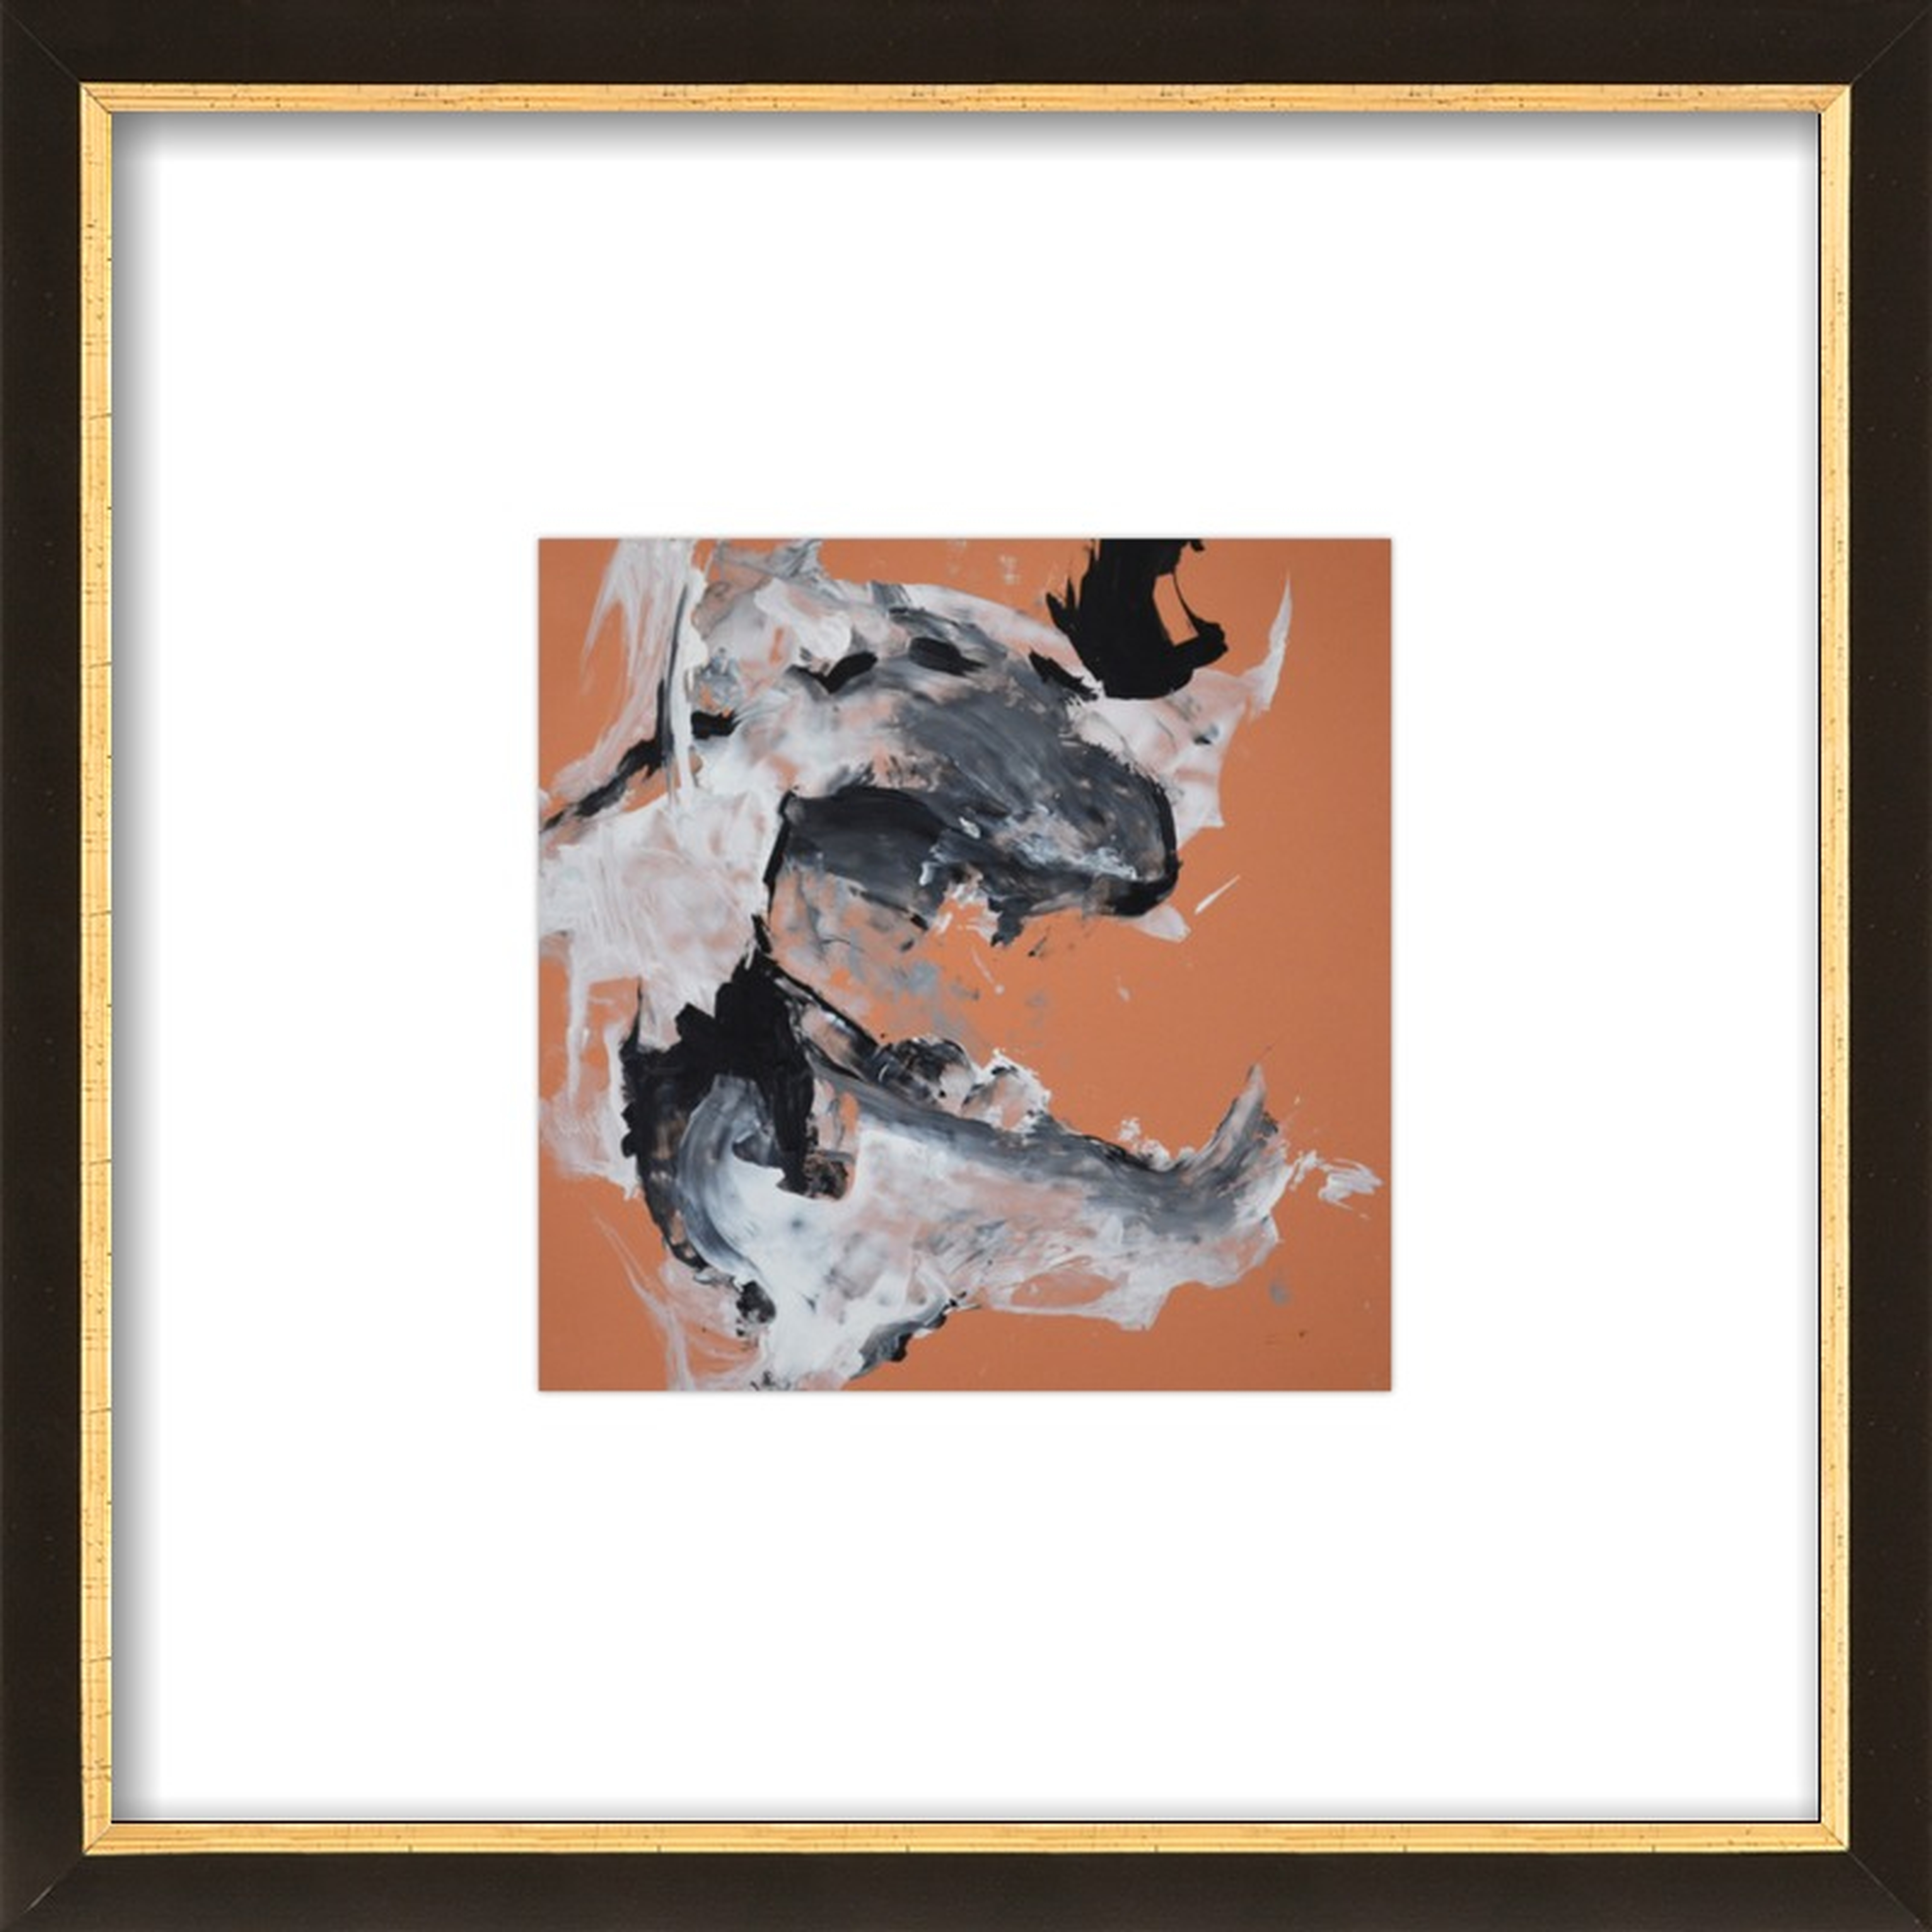 Color Study 22 by Alison Causer for Artfully Walls - 8"x8" - Ornate - Black with Gold Wood, frame width 0.8", depth 0.875" - Artfully Walls